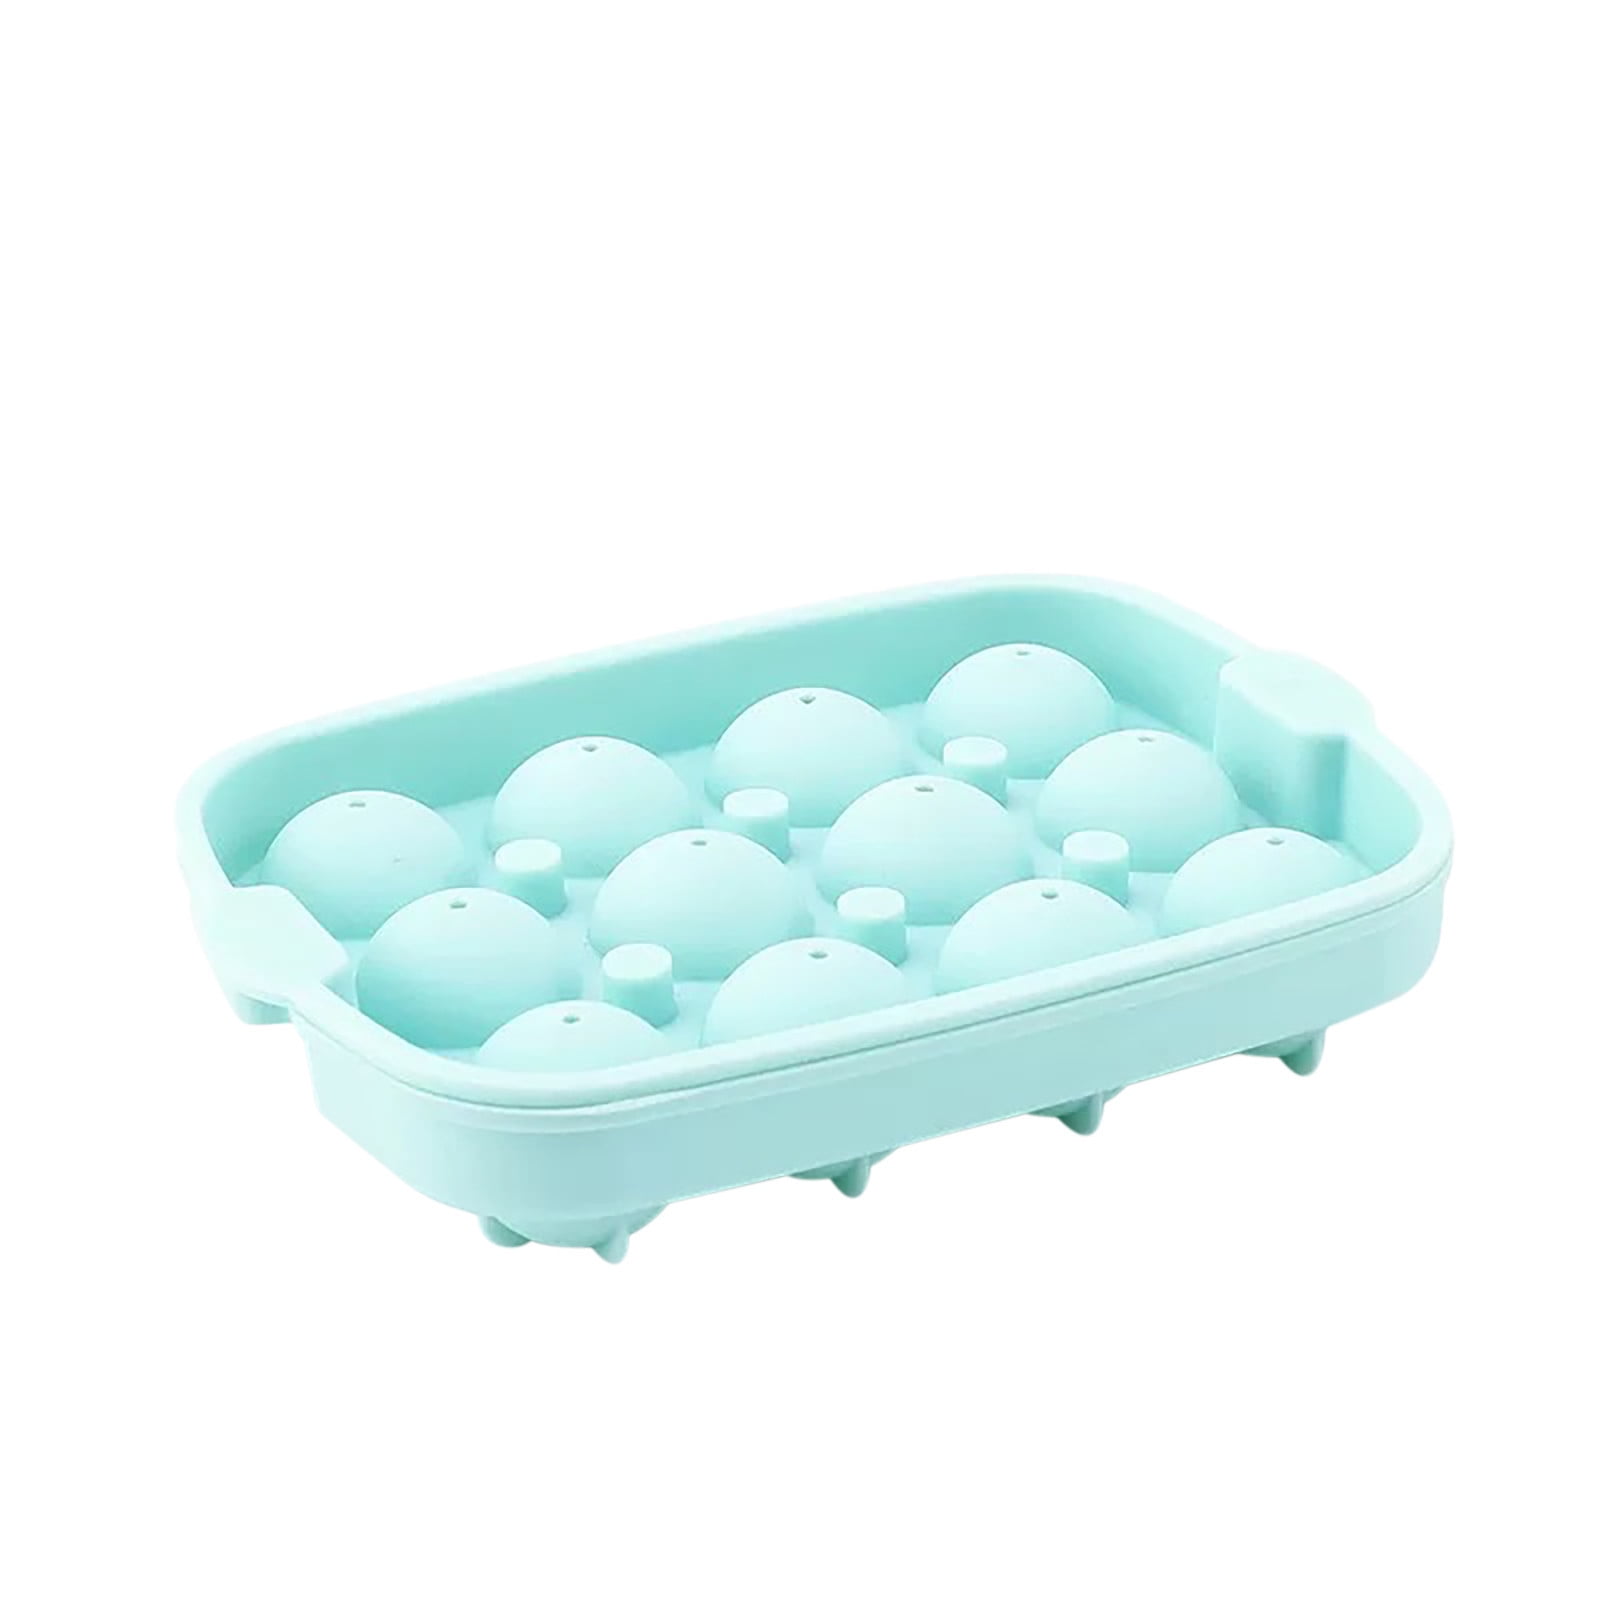 Mighty Rock Ice Cube Tray Silicone Bottom with Ice Bin Scoop 308 Pcs Tiny  Crushed Ice Cubes Molds for Chilling Drinks Coffee Juice White